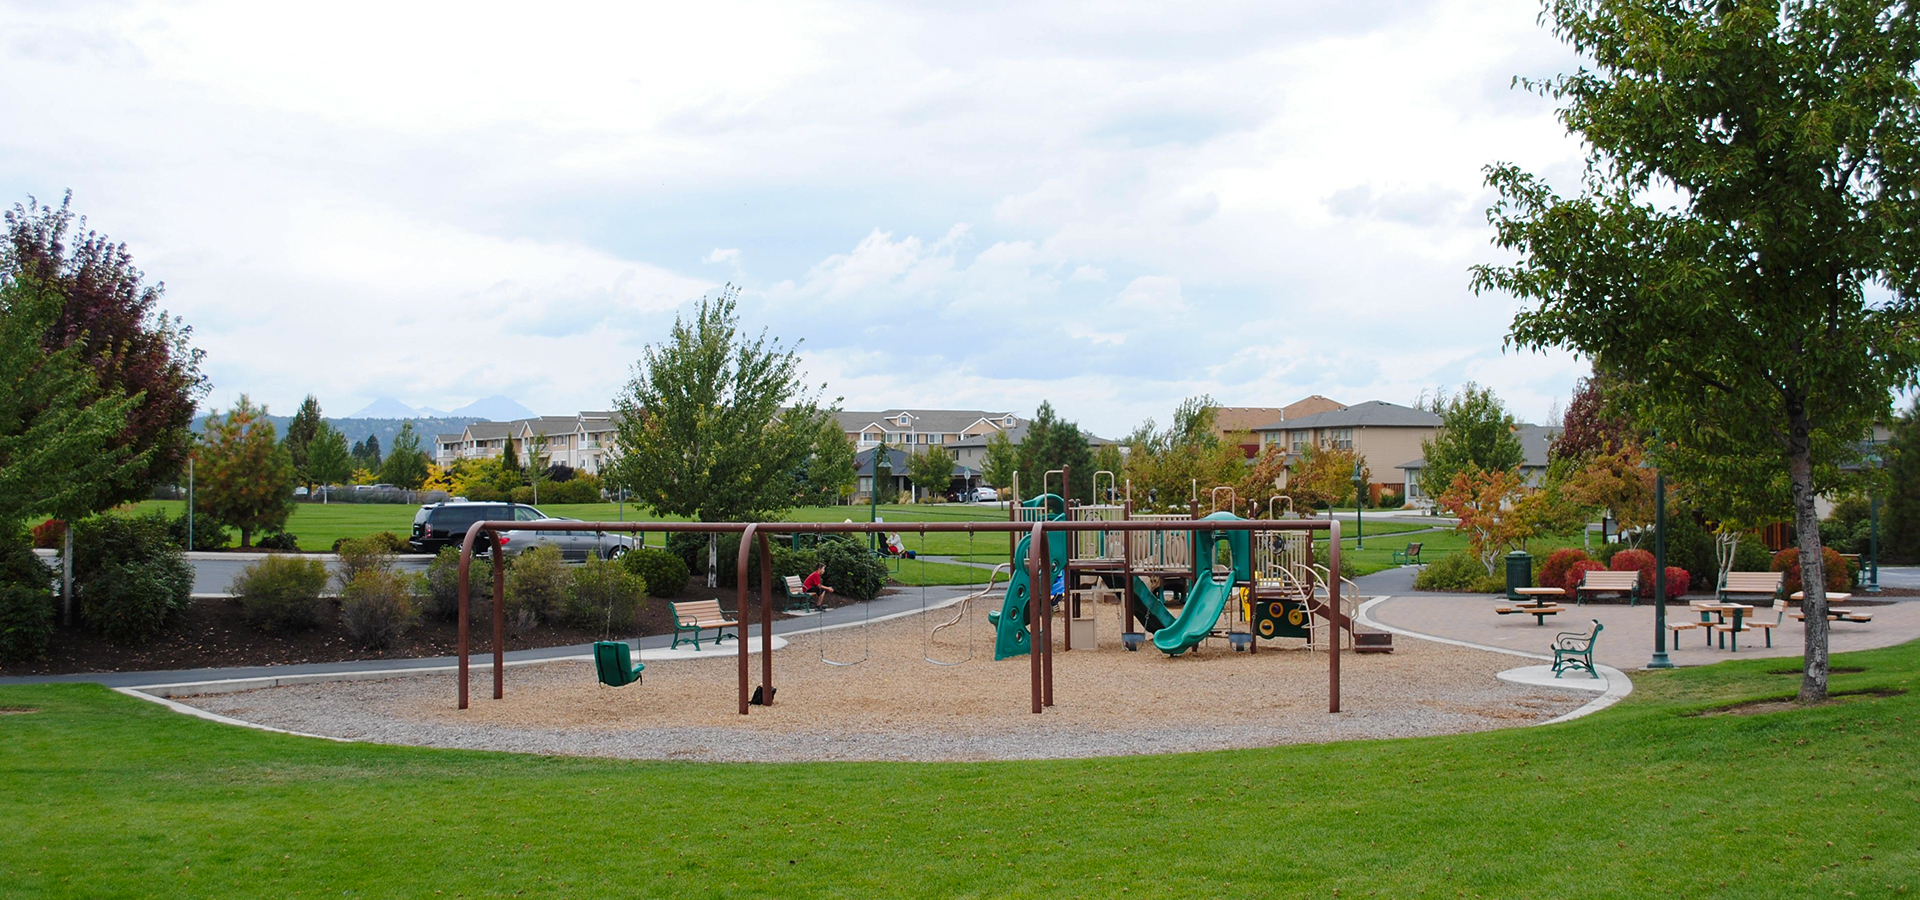 The play structure at Mountain View Park.